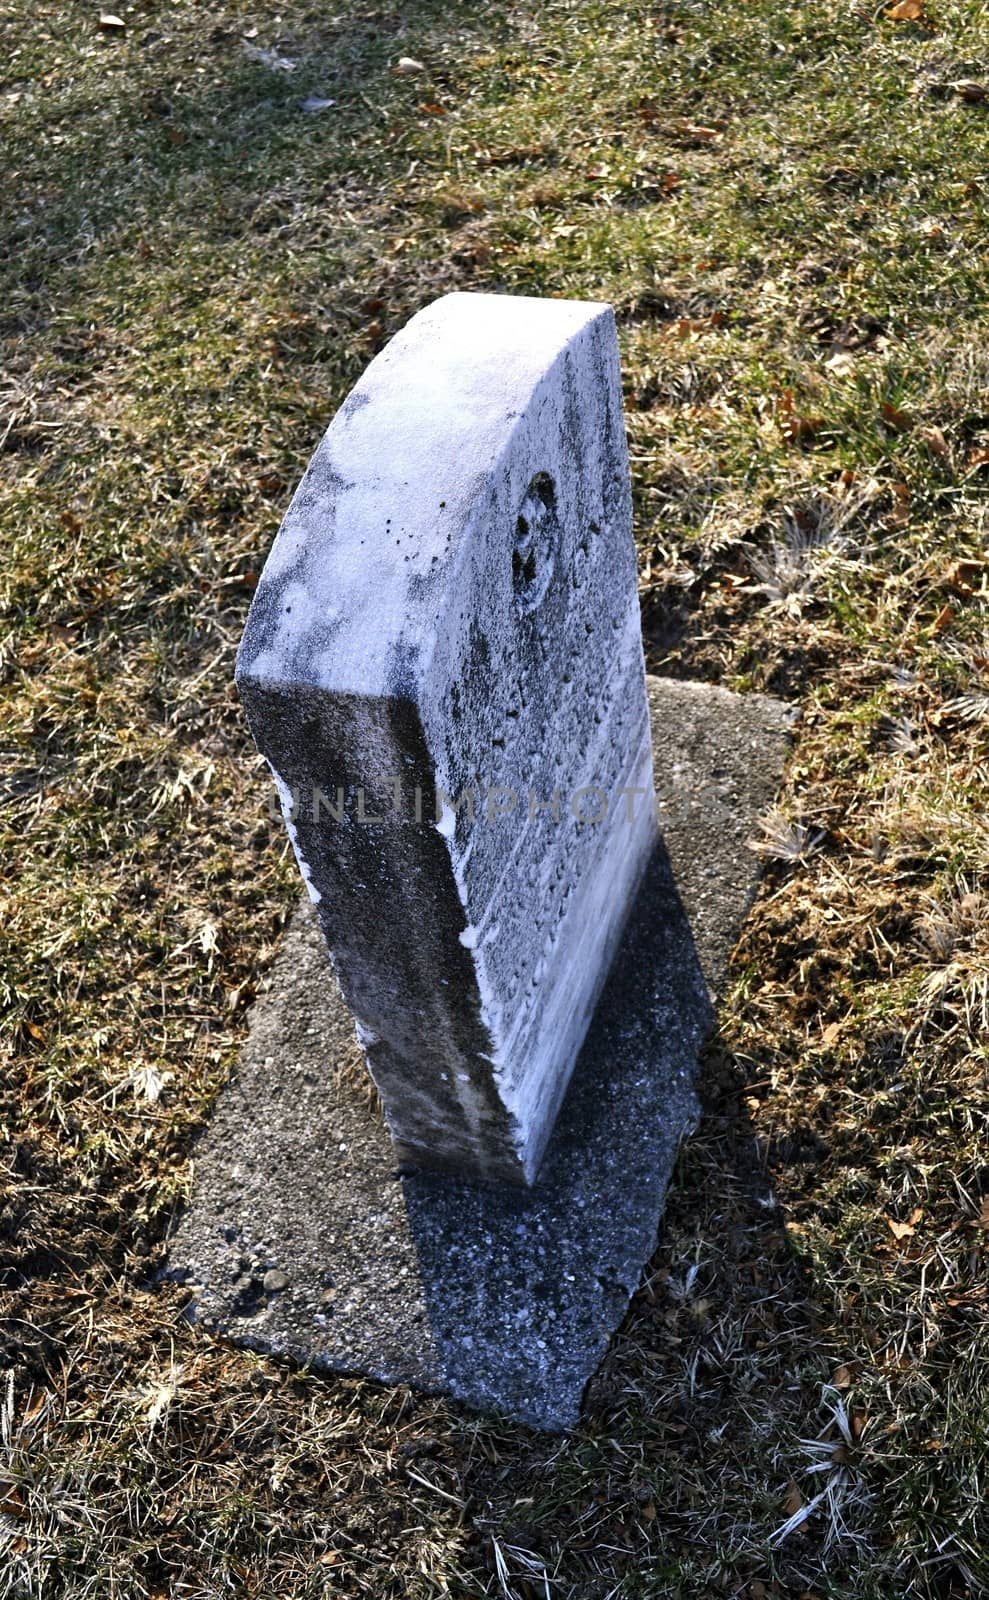 A view of the headstone from the side
